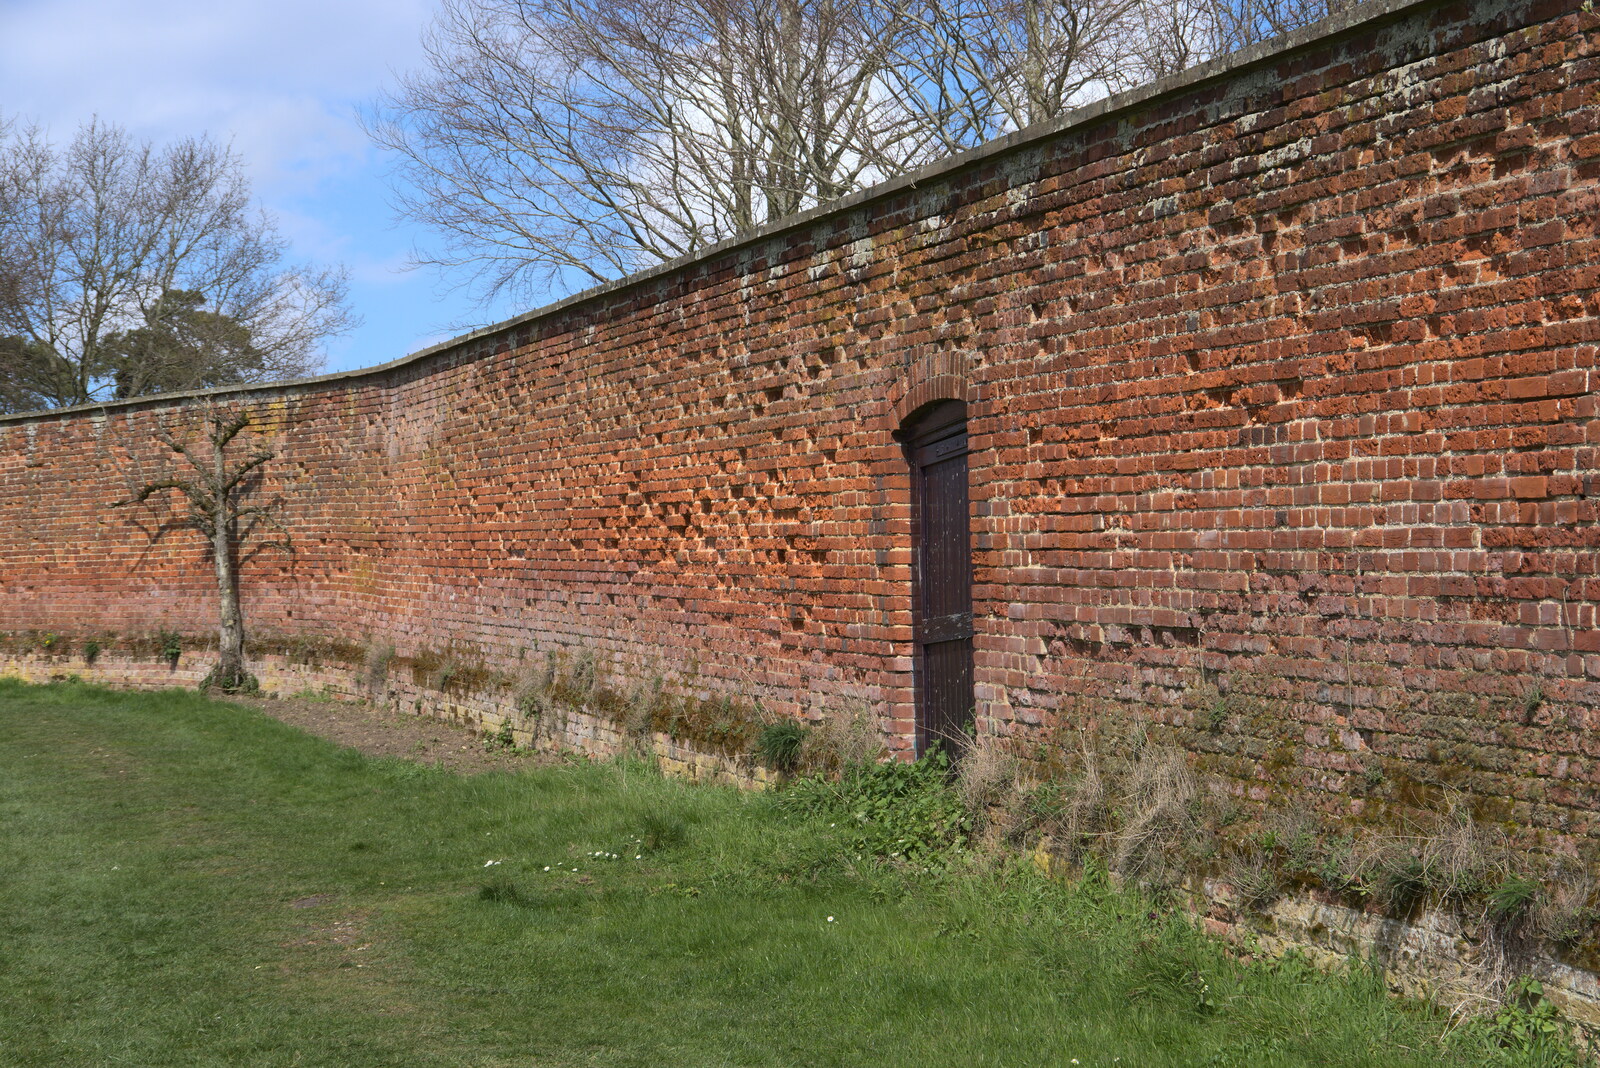 The pock-marked garden wall from A Return to Ickworth House, Horringer, Suffolk - 11th April 2021